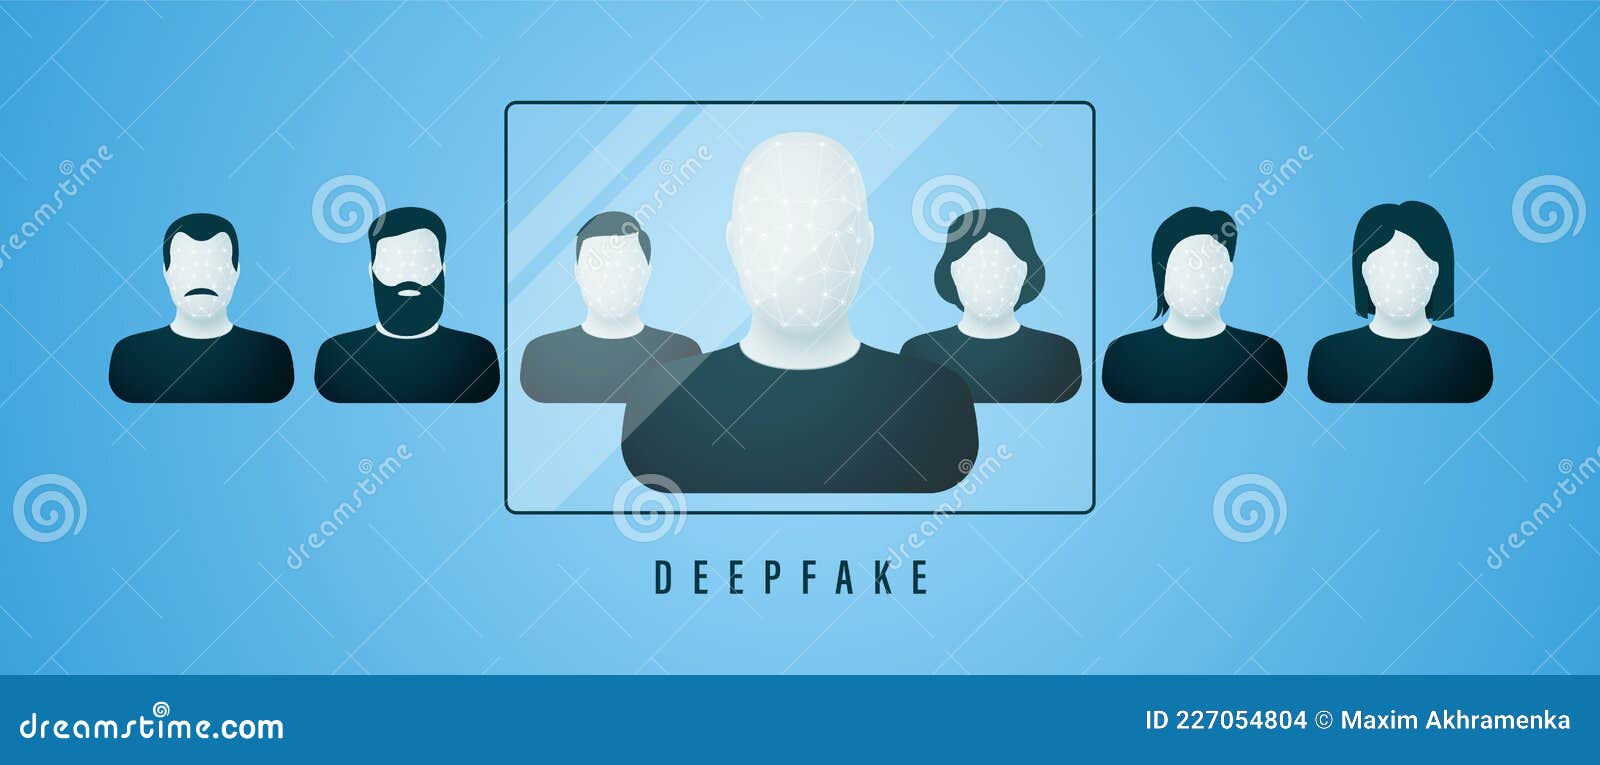 deepfake concept. face change using artificial neural networks.